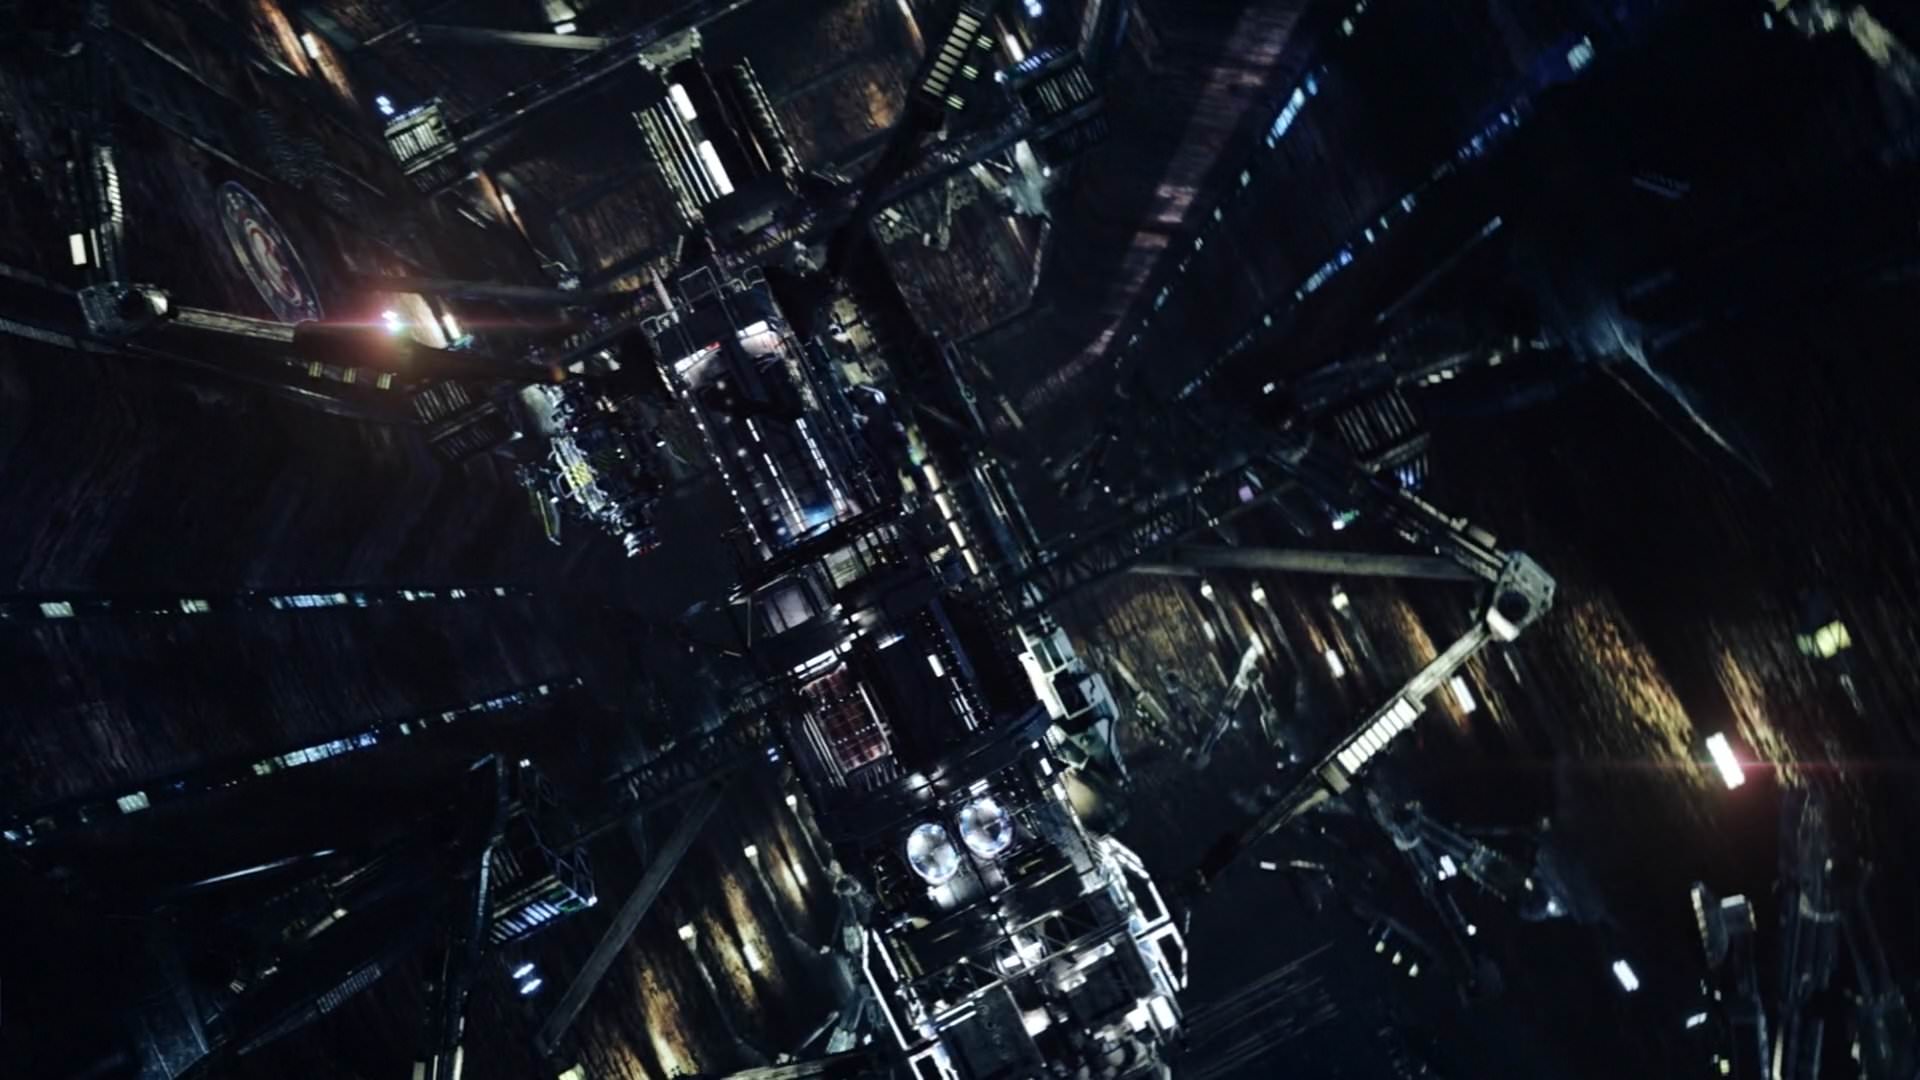 Free download The Expanse Wallpaper 15 1920 X 1080 stmednet [1920x1080] for  your Desktop, Mobile & Tablet | Explore 37+ The Expanse Wallpapers | The  Lord Of The Rings Wallpaper, The Wallpapers,